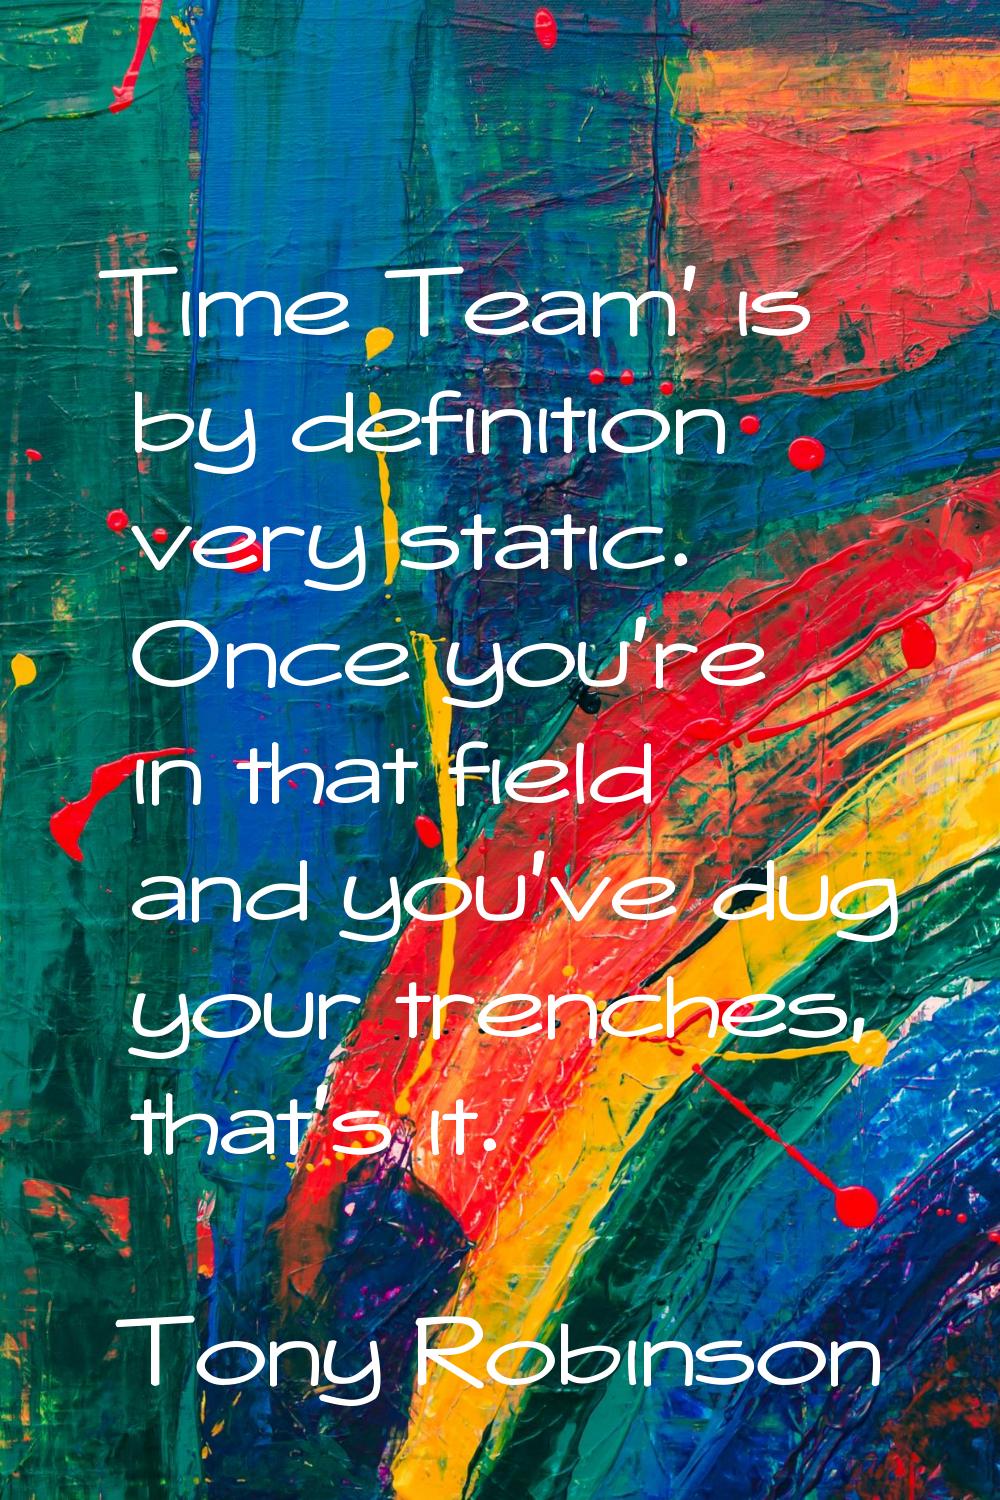 Time Team' is by definition very static. Once you're in that field and you've dug your trenches, th